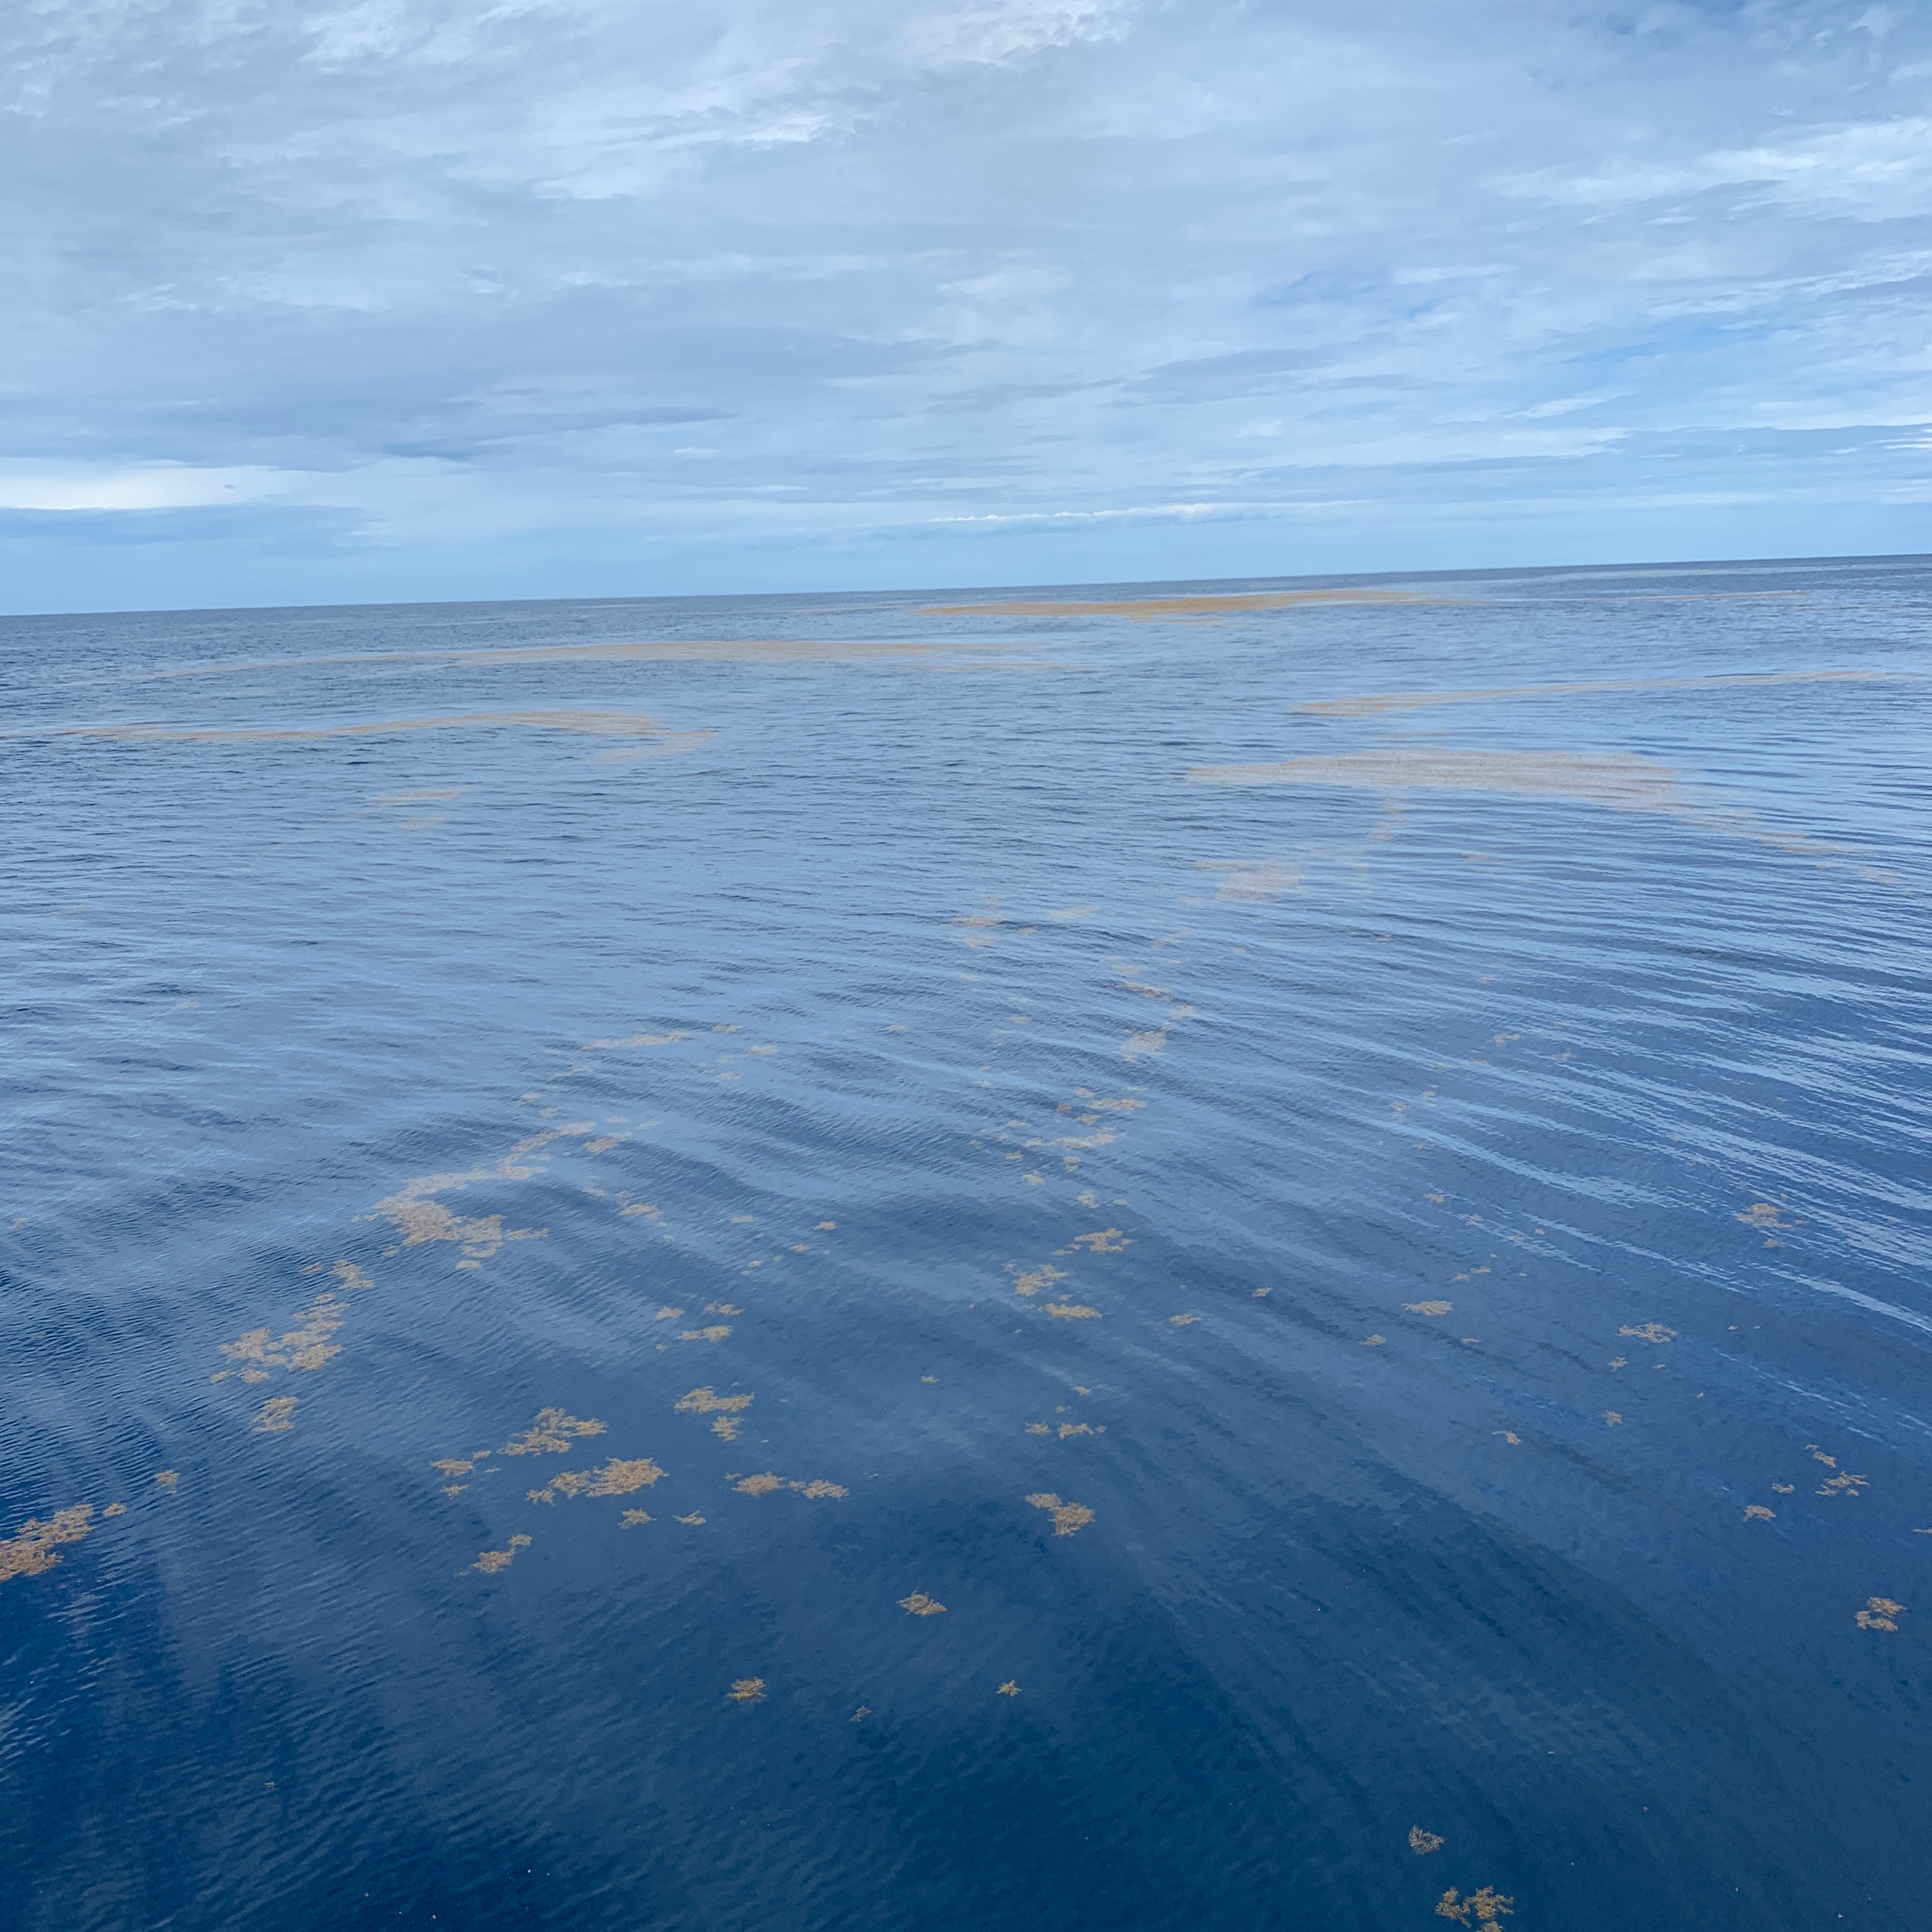 We observed various sizes of Sargassum patches from small (front) to large (back) (Photo by Ellen Park).